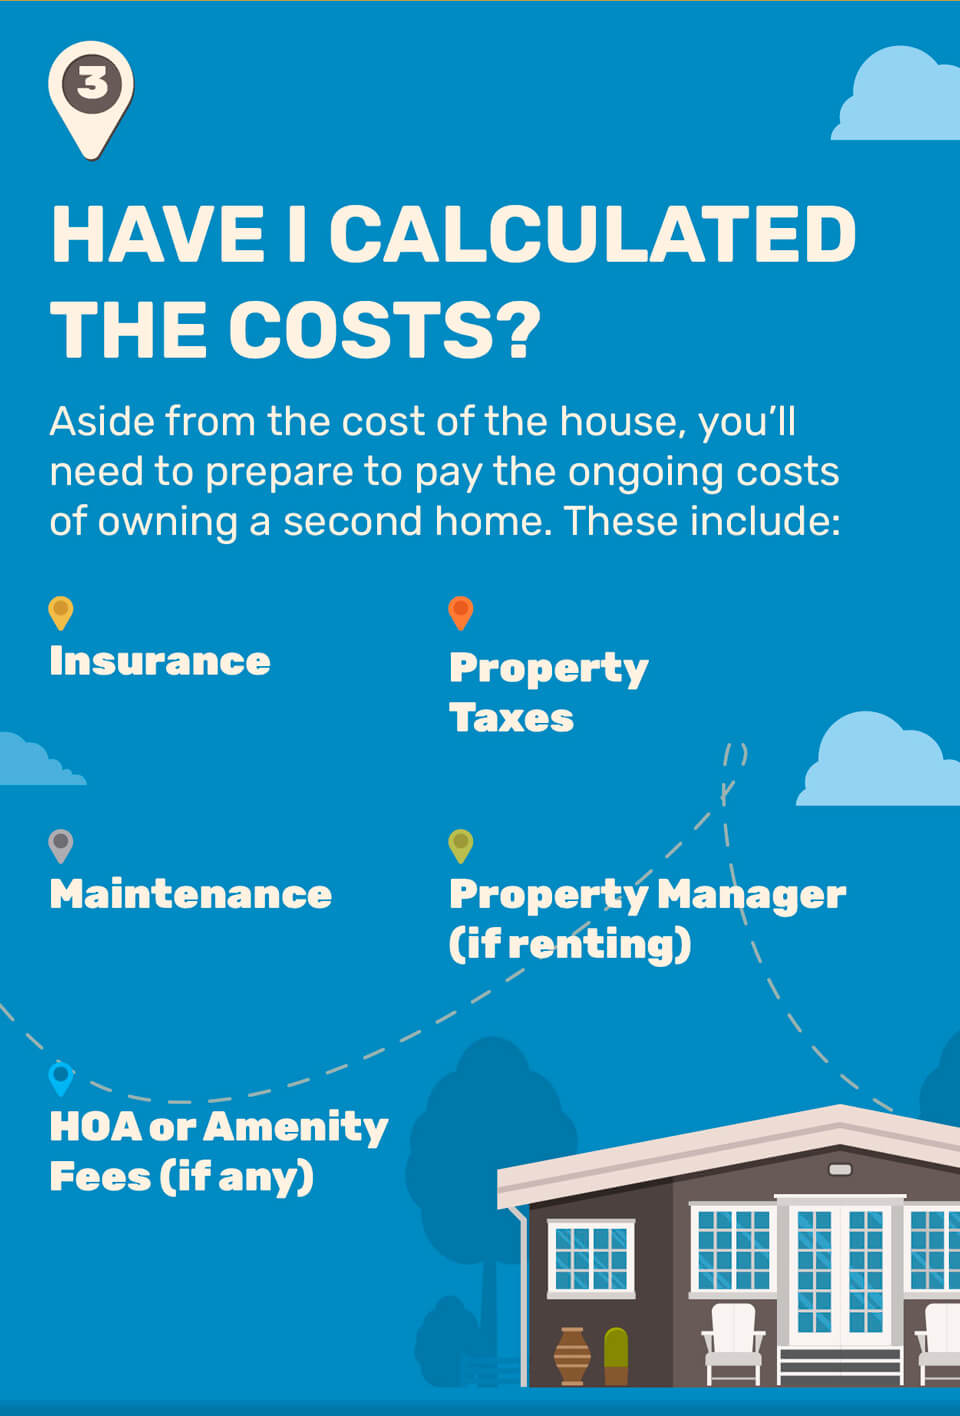 3. Have I Calculated the Costs? Aside from the cost of the house, you’ll need to prepare to pay the ongoing costs of owning a second home. These include: Insurance, property taxes, maintenance, property manager (if renting), and HOA or Amenity Fees (if any).